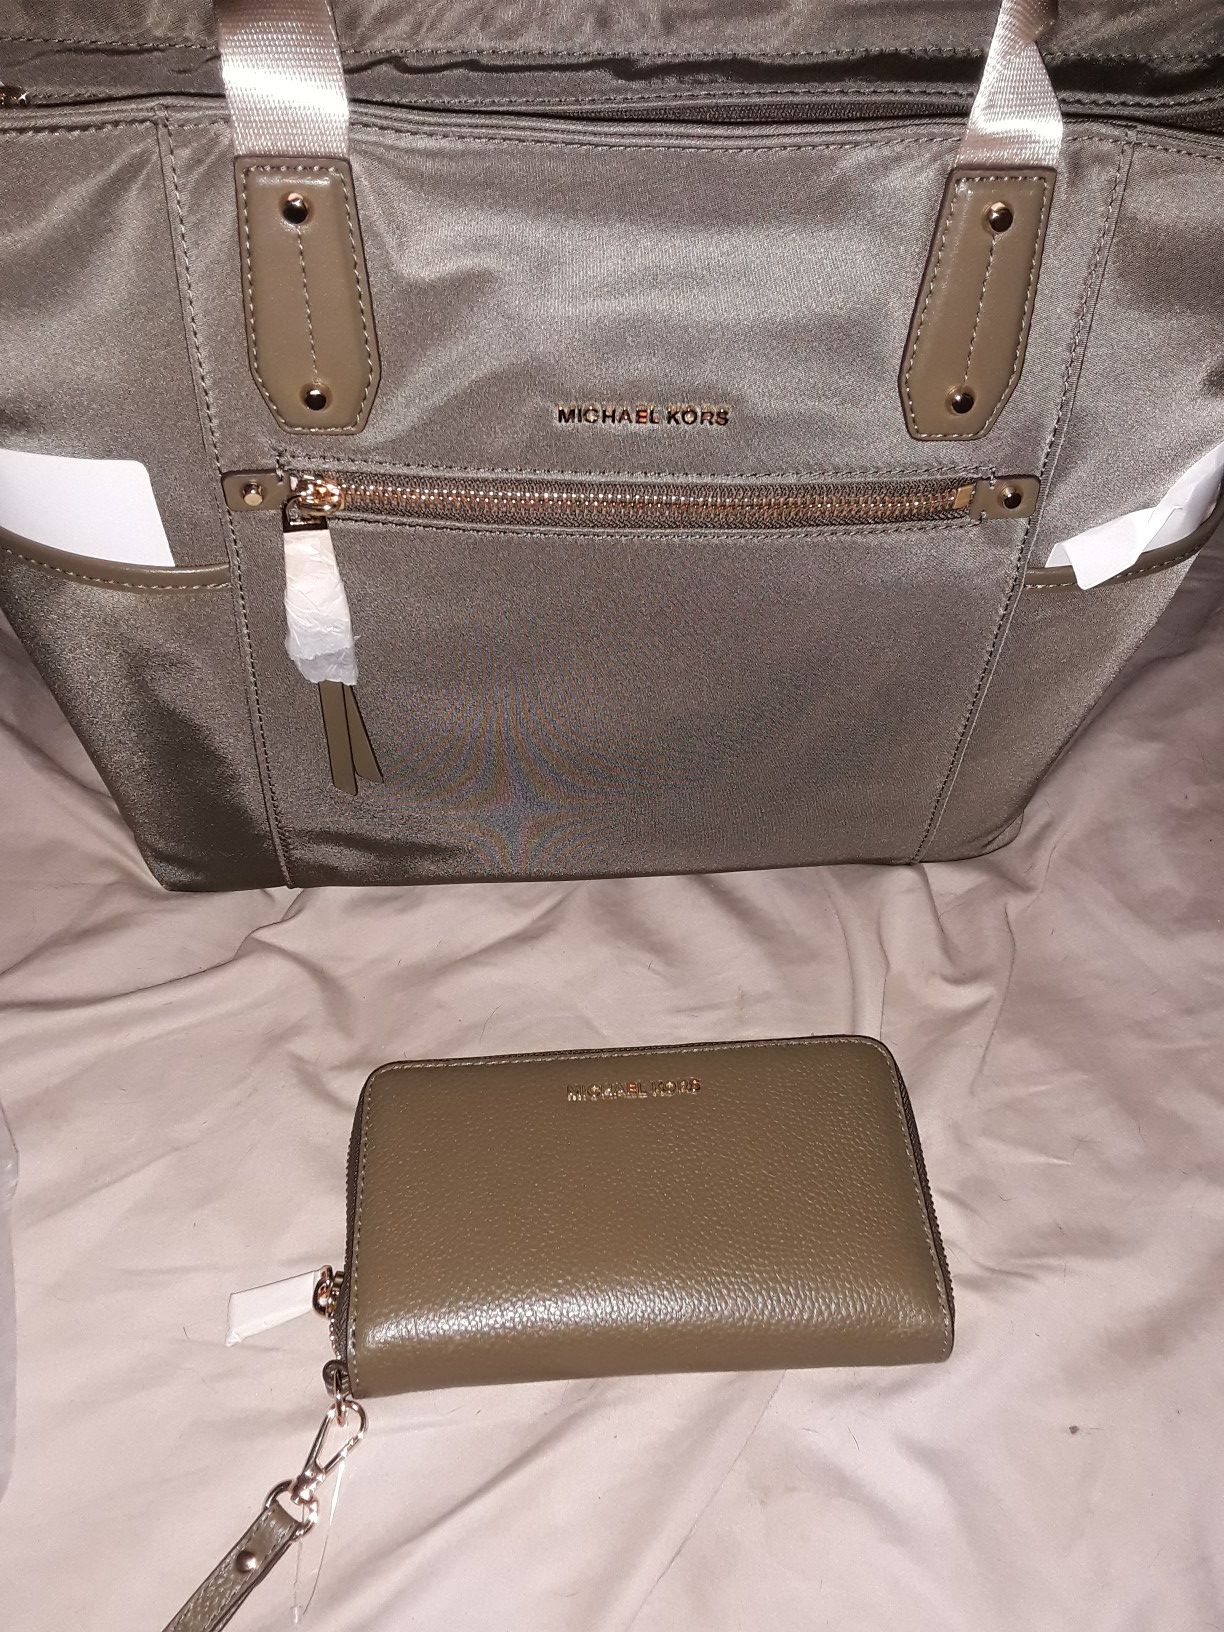 Michael Kors Large Tote and Large Smartphone Wristlet